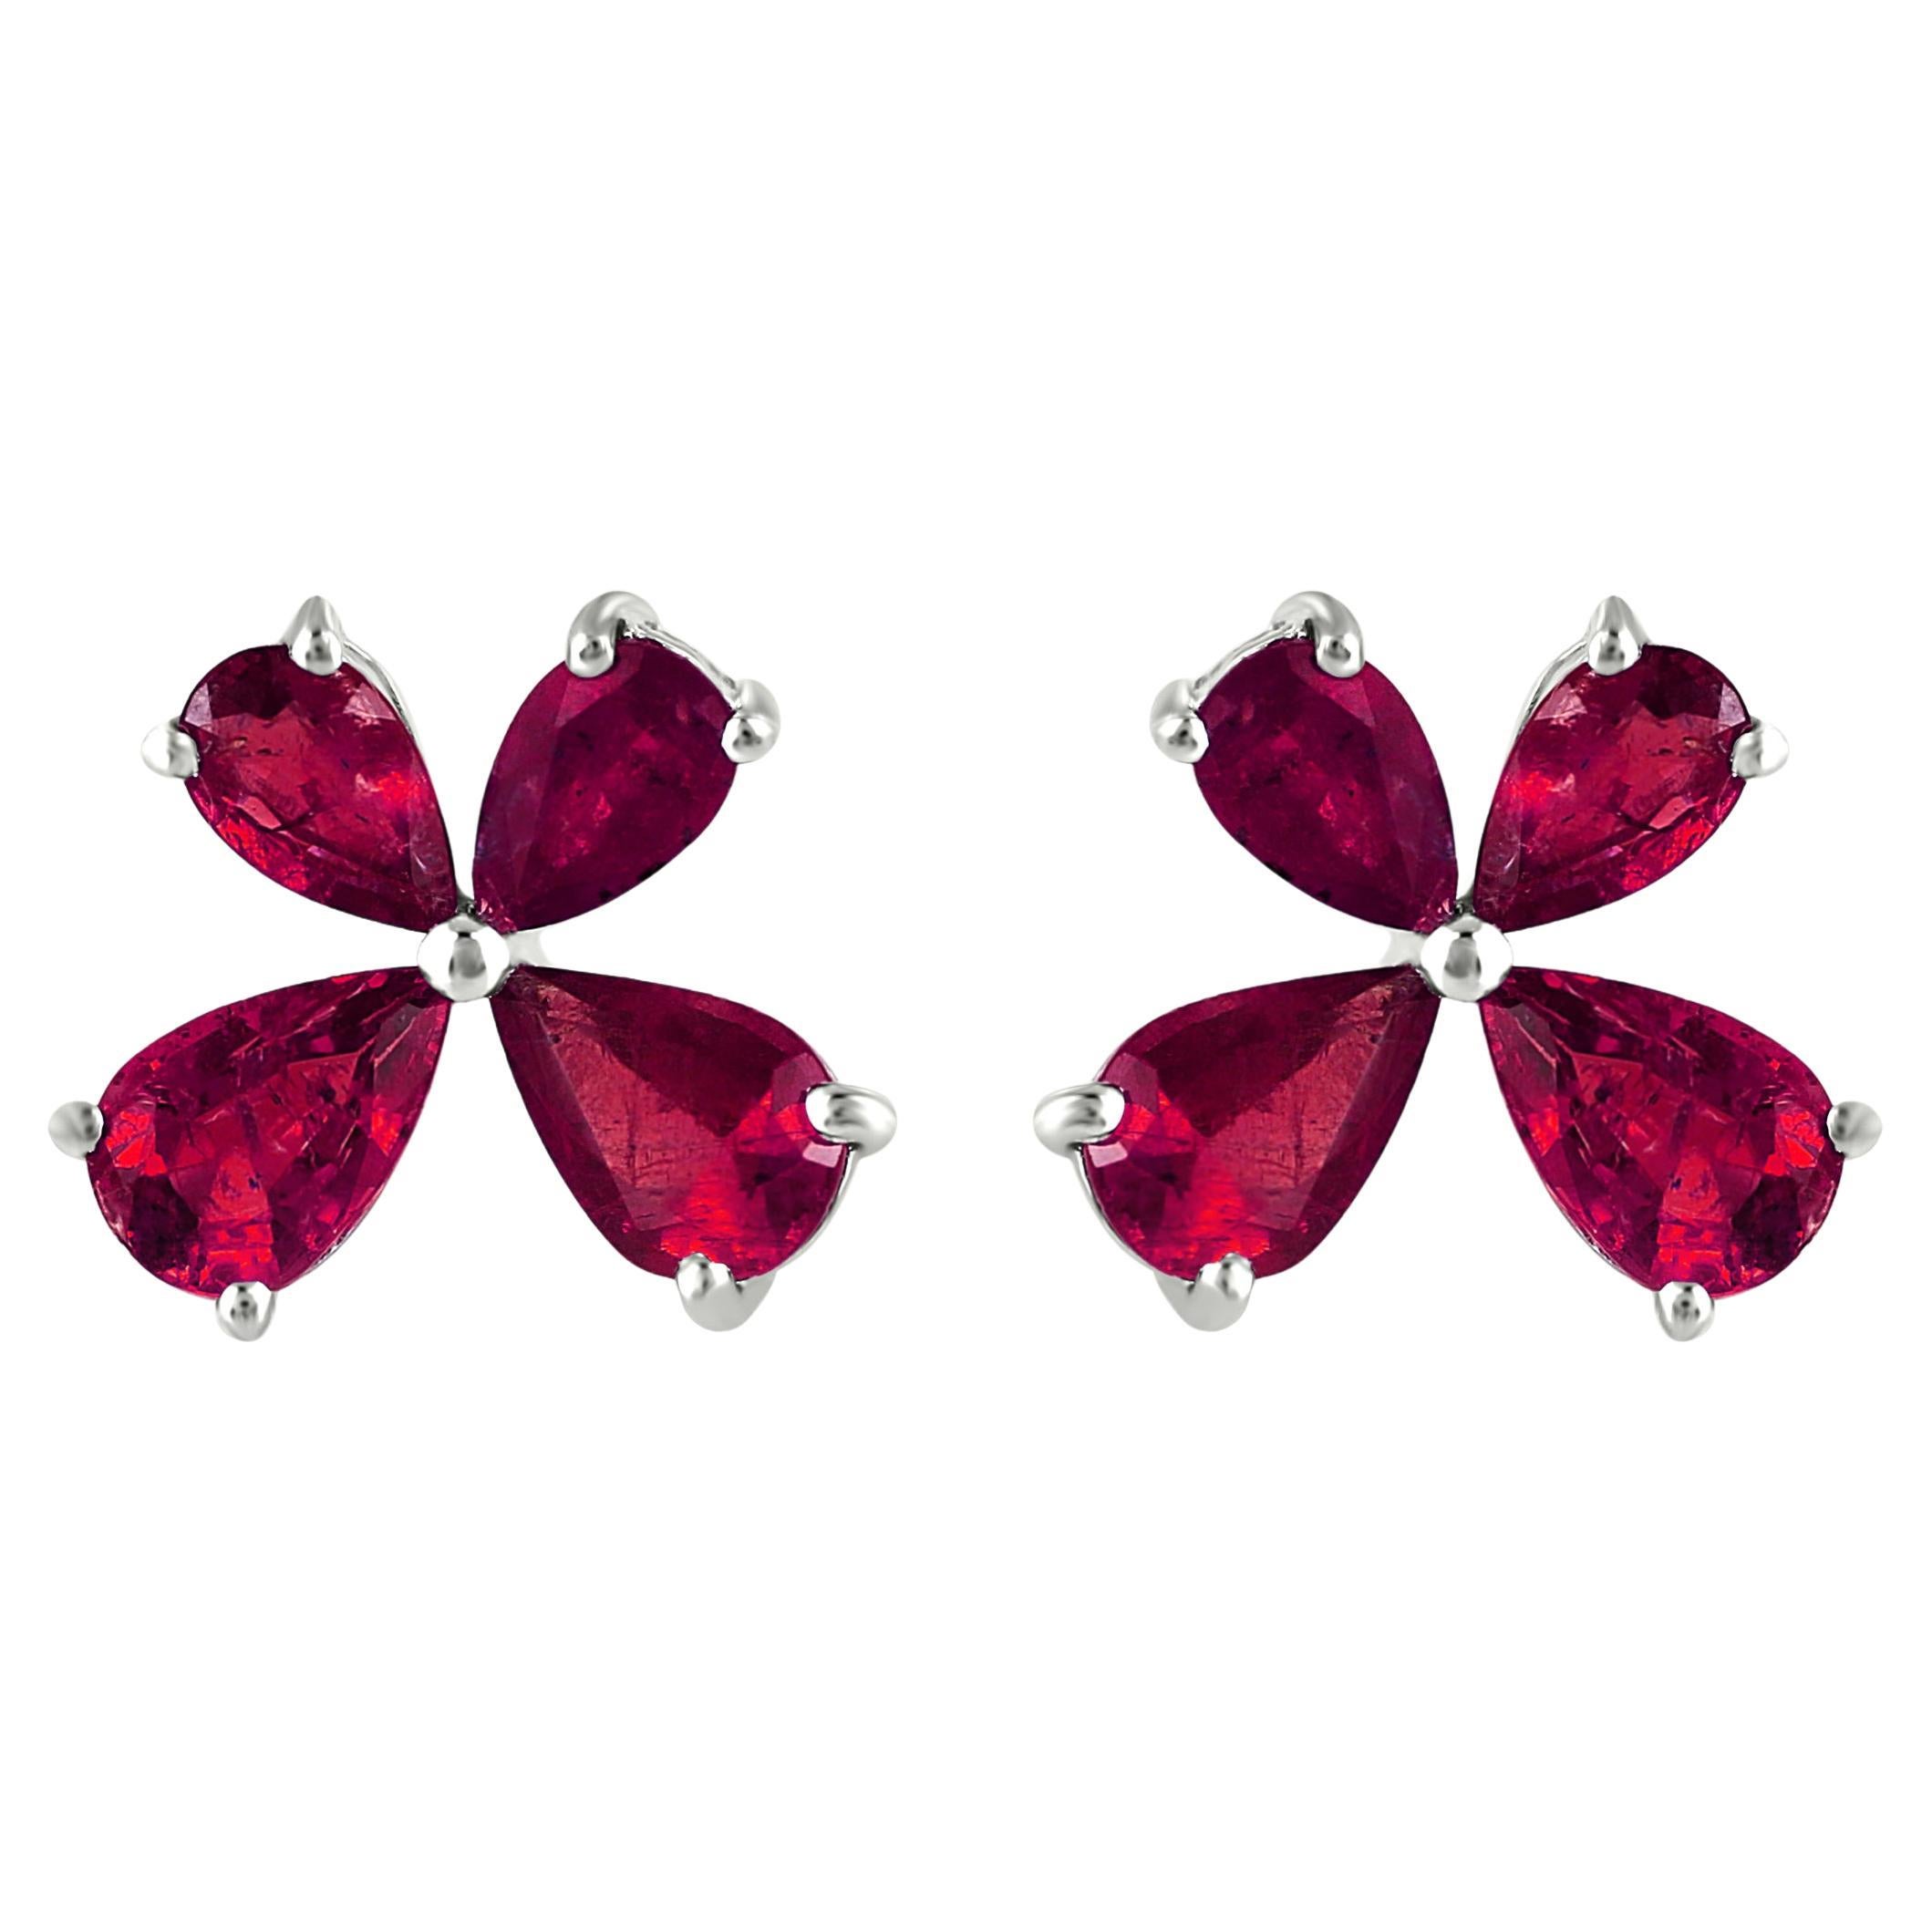 Gemistry 2.45 Cttw. Pear Shaped Ruby Floral Stud Earrings in 18k White Gold